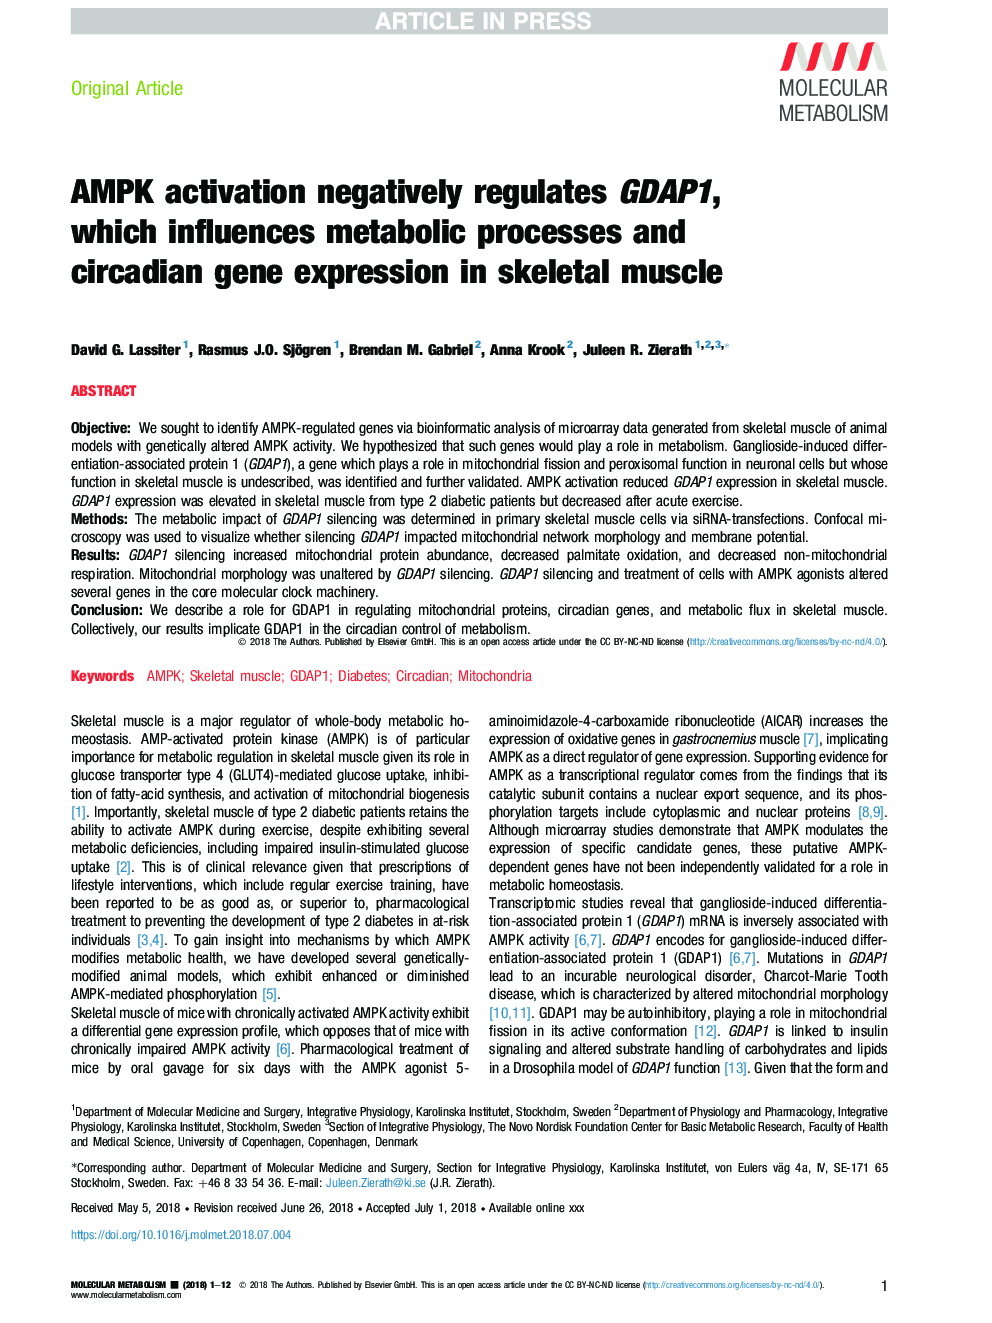 AMPK activation negatively regulates GDAP1, which influences metabolic processes and circadian gene expression in skeletal muscle